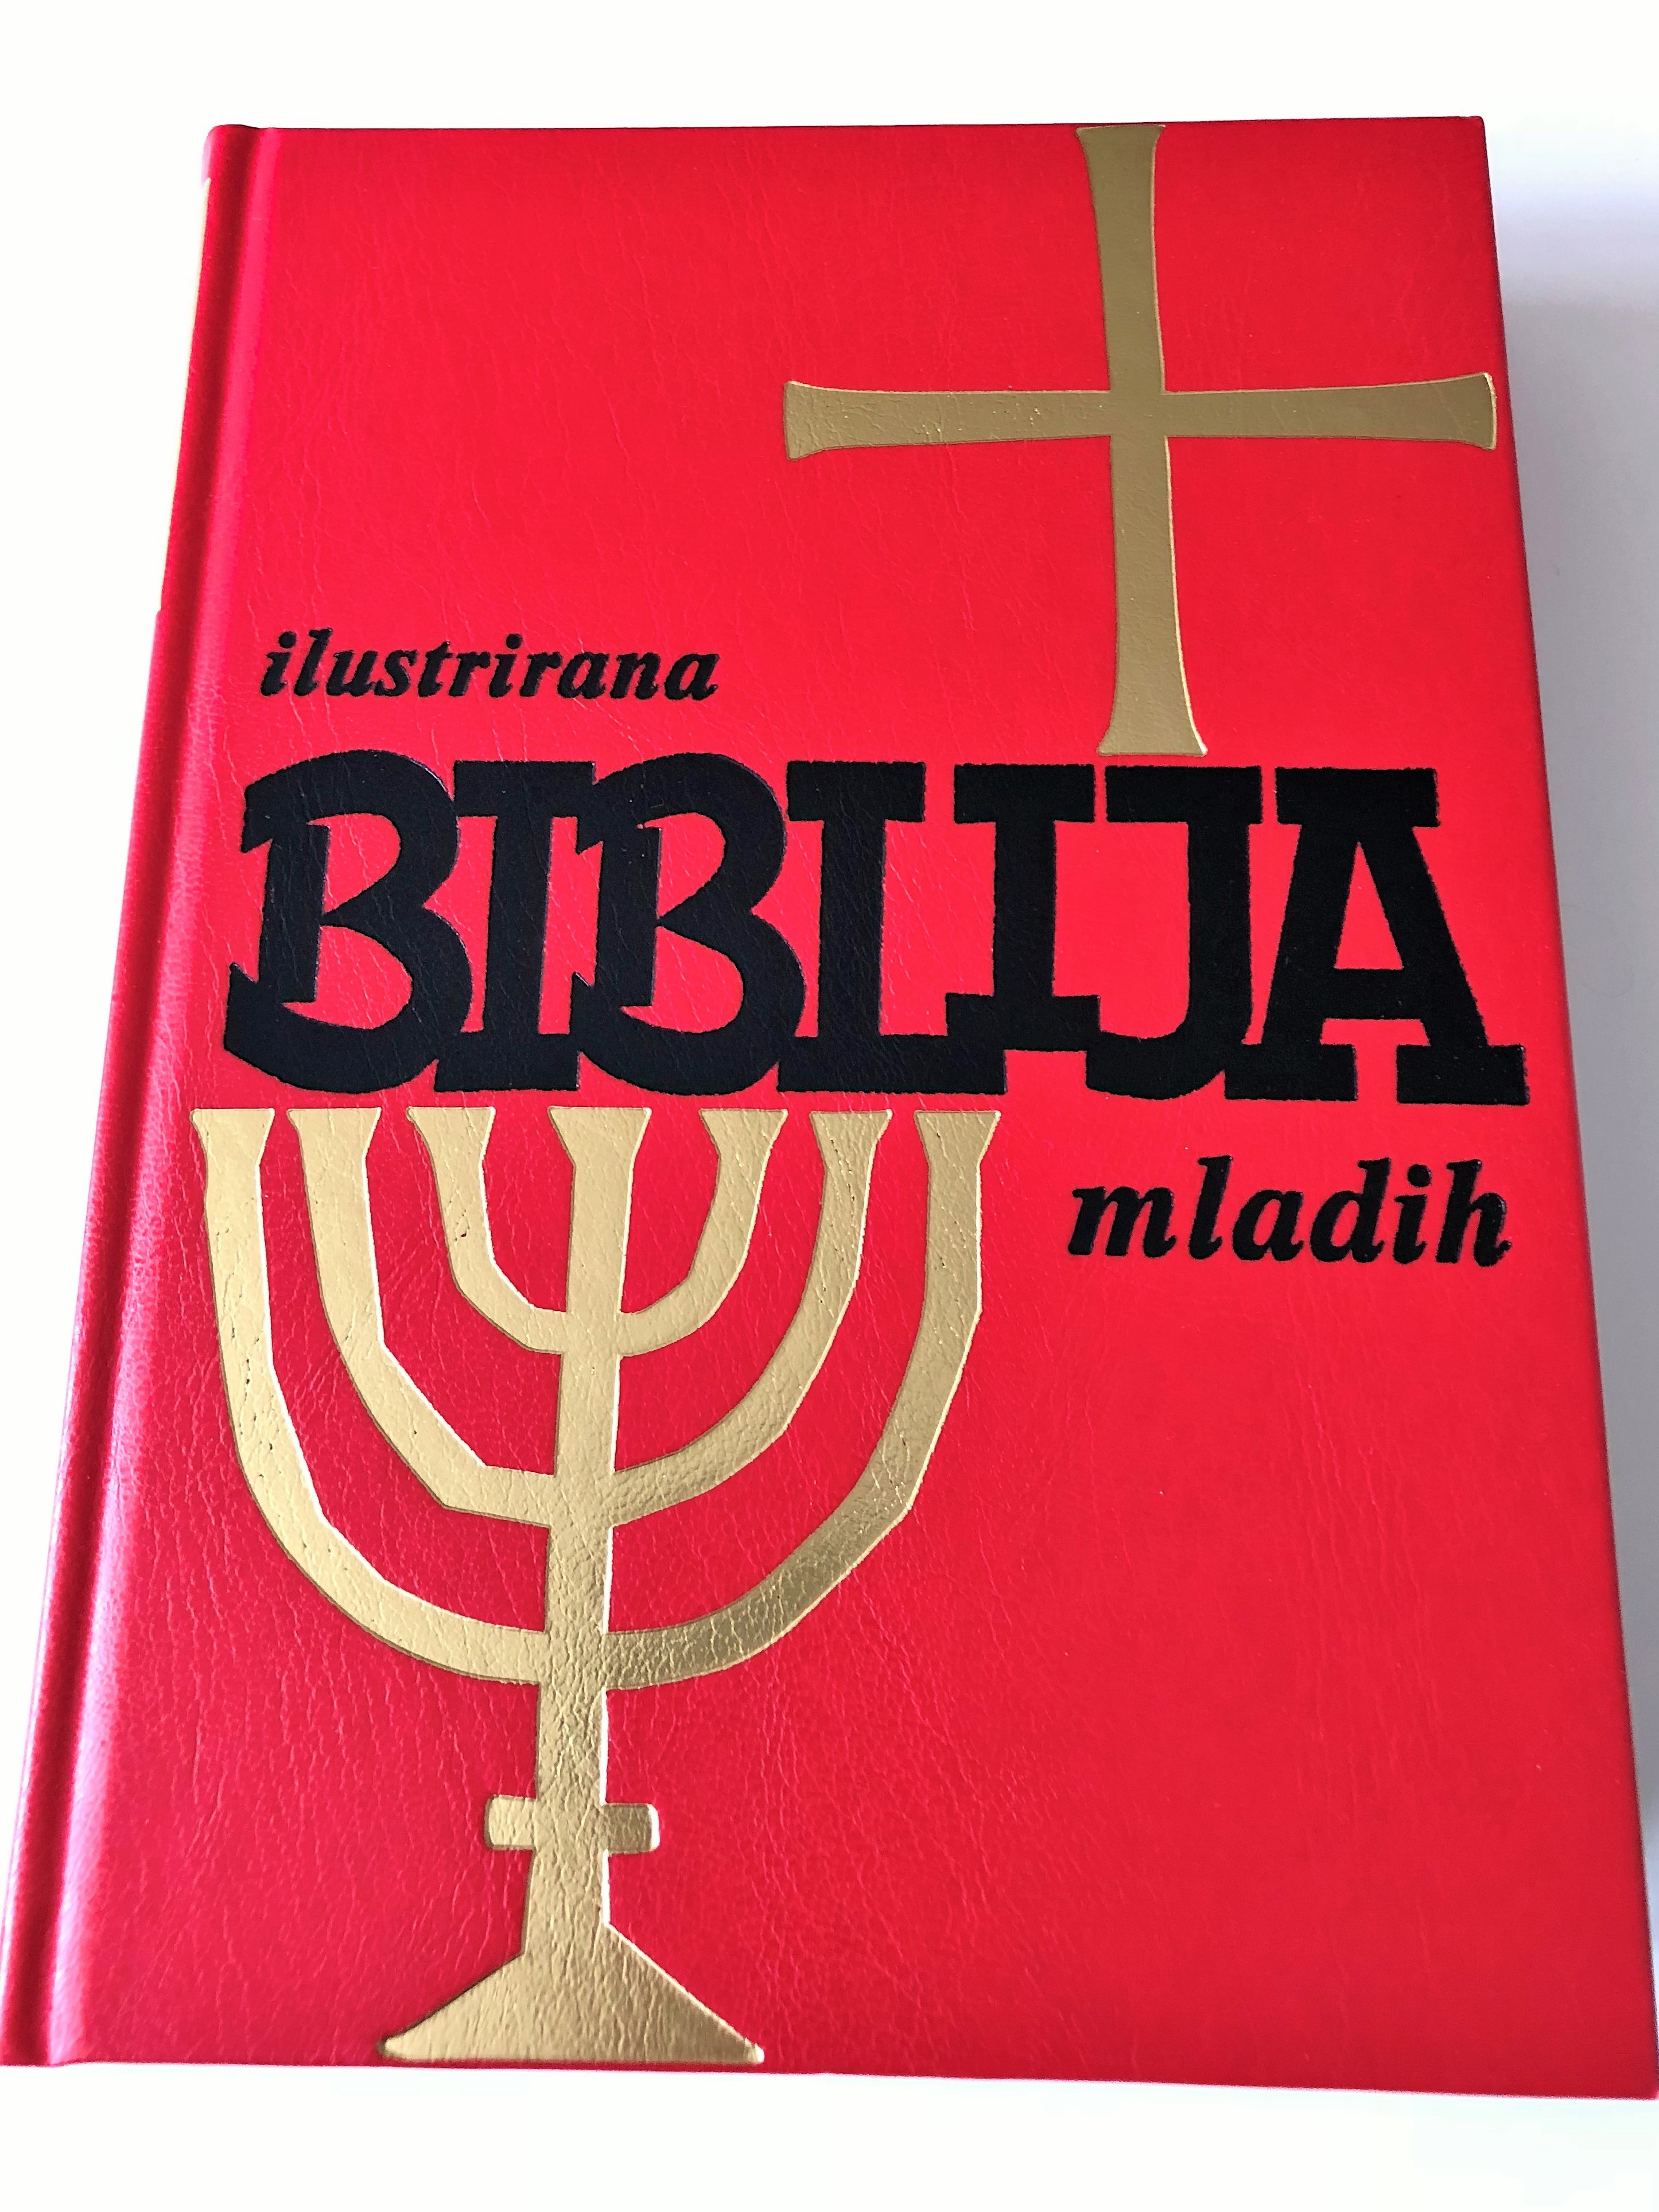 croatian-illustrated-bible-for-young-people-red-w-cross-and-candlestand-1-.jpg